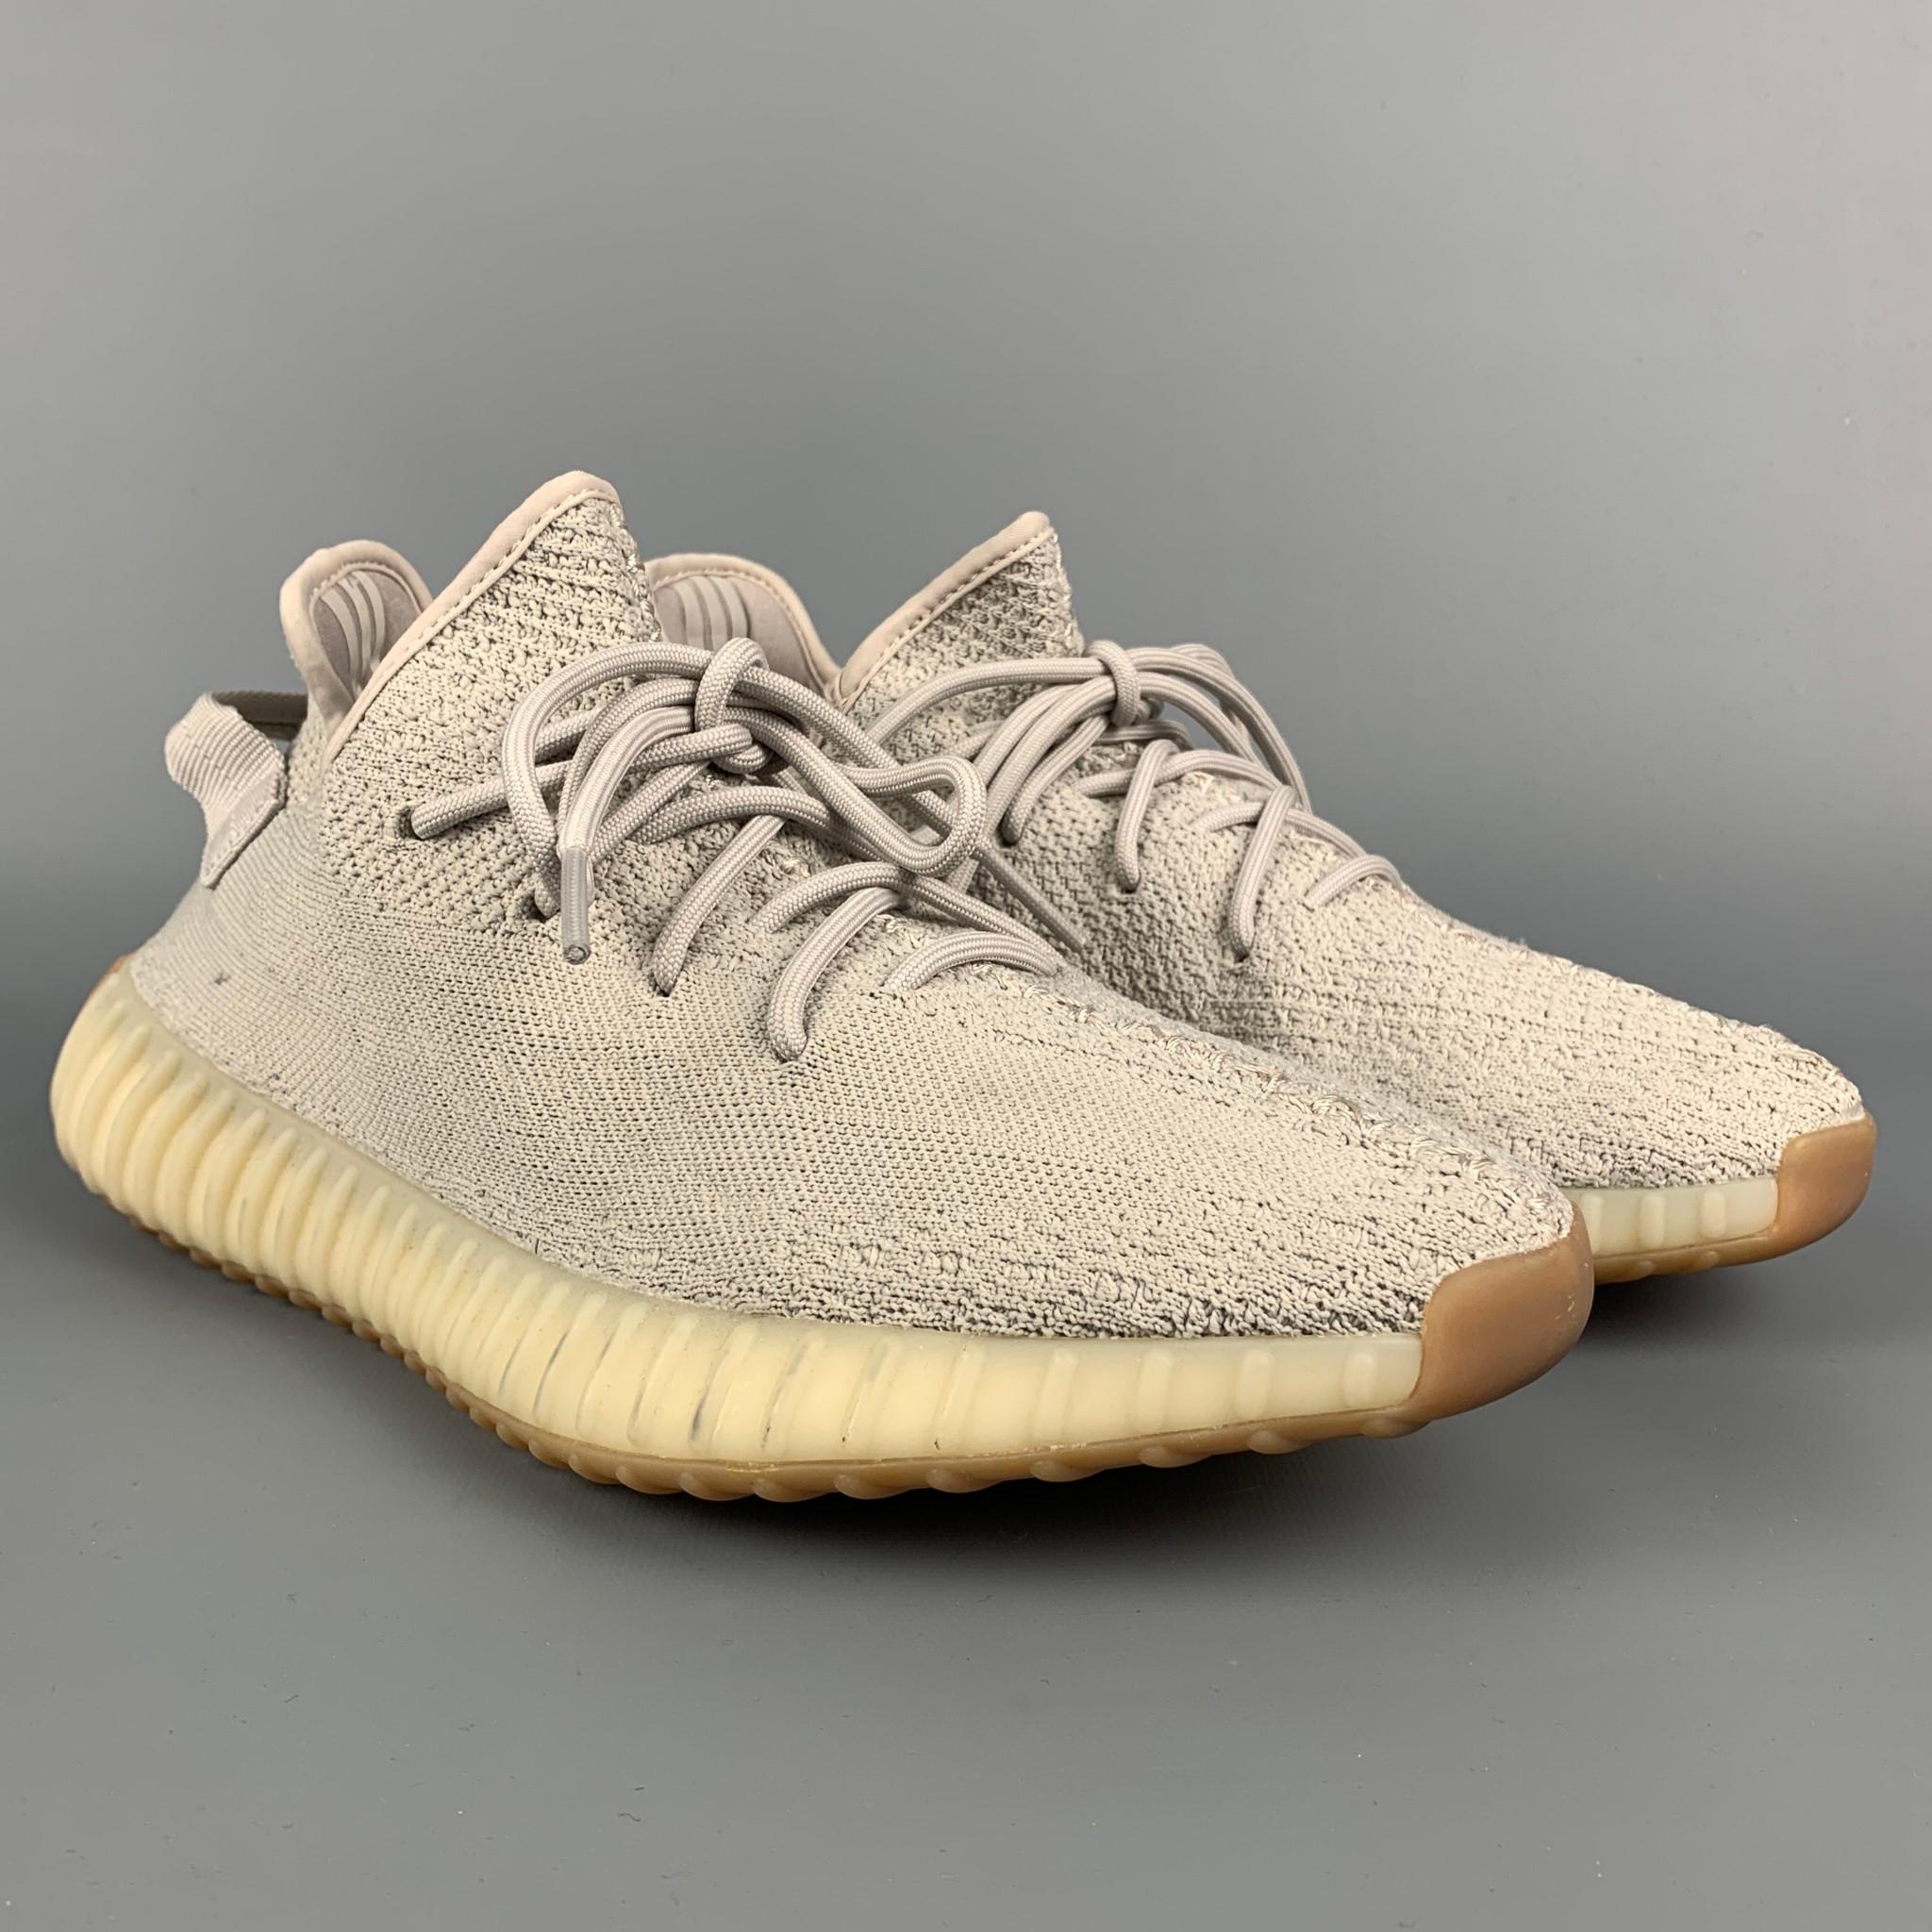 YEEZY x ADIDAS Boost 350 sneakers comes in a light grey knit material featuring a rubber sole and a lace up closure. 

Very Good Pre-Owned Condition.
Marked: 11.5
 
Outsole: 12.5 in. x 5 in. 